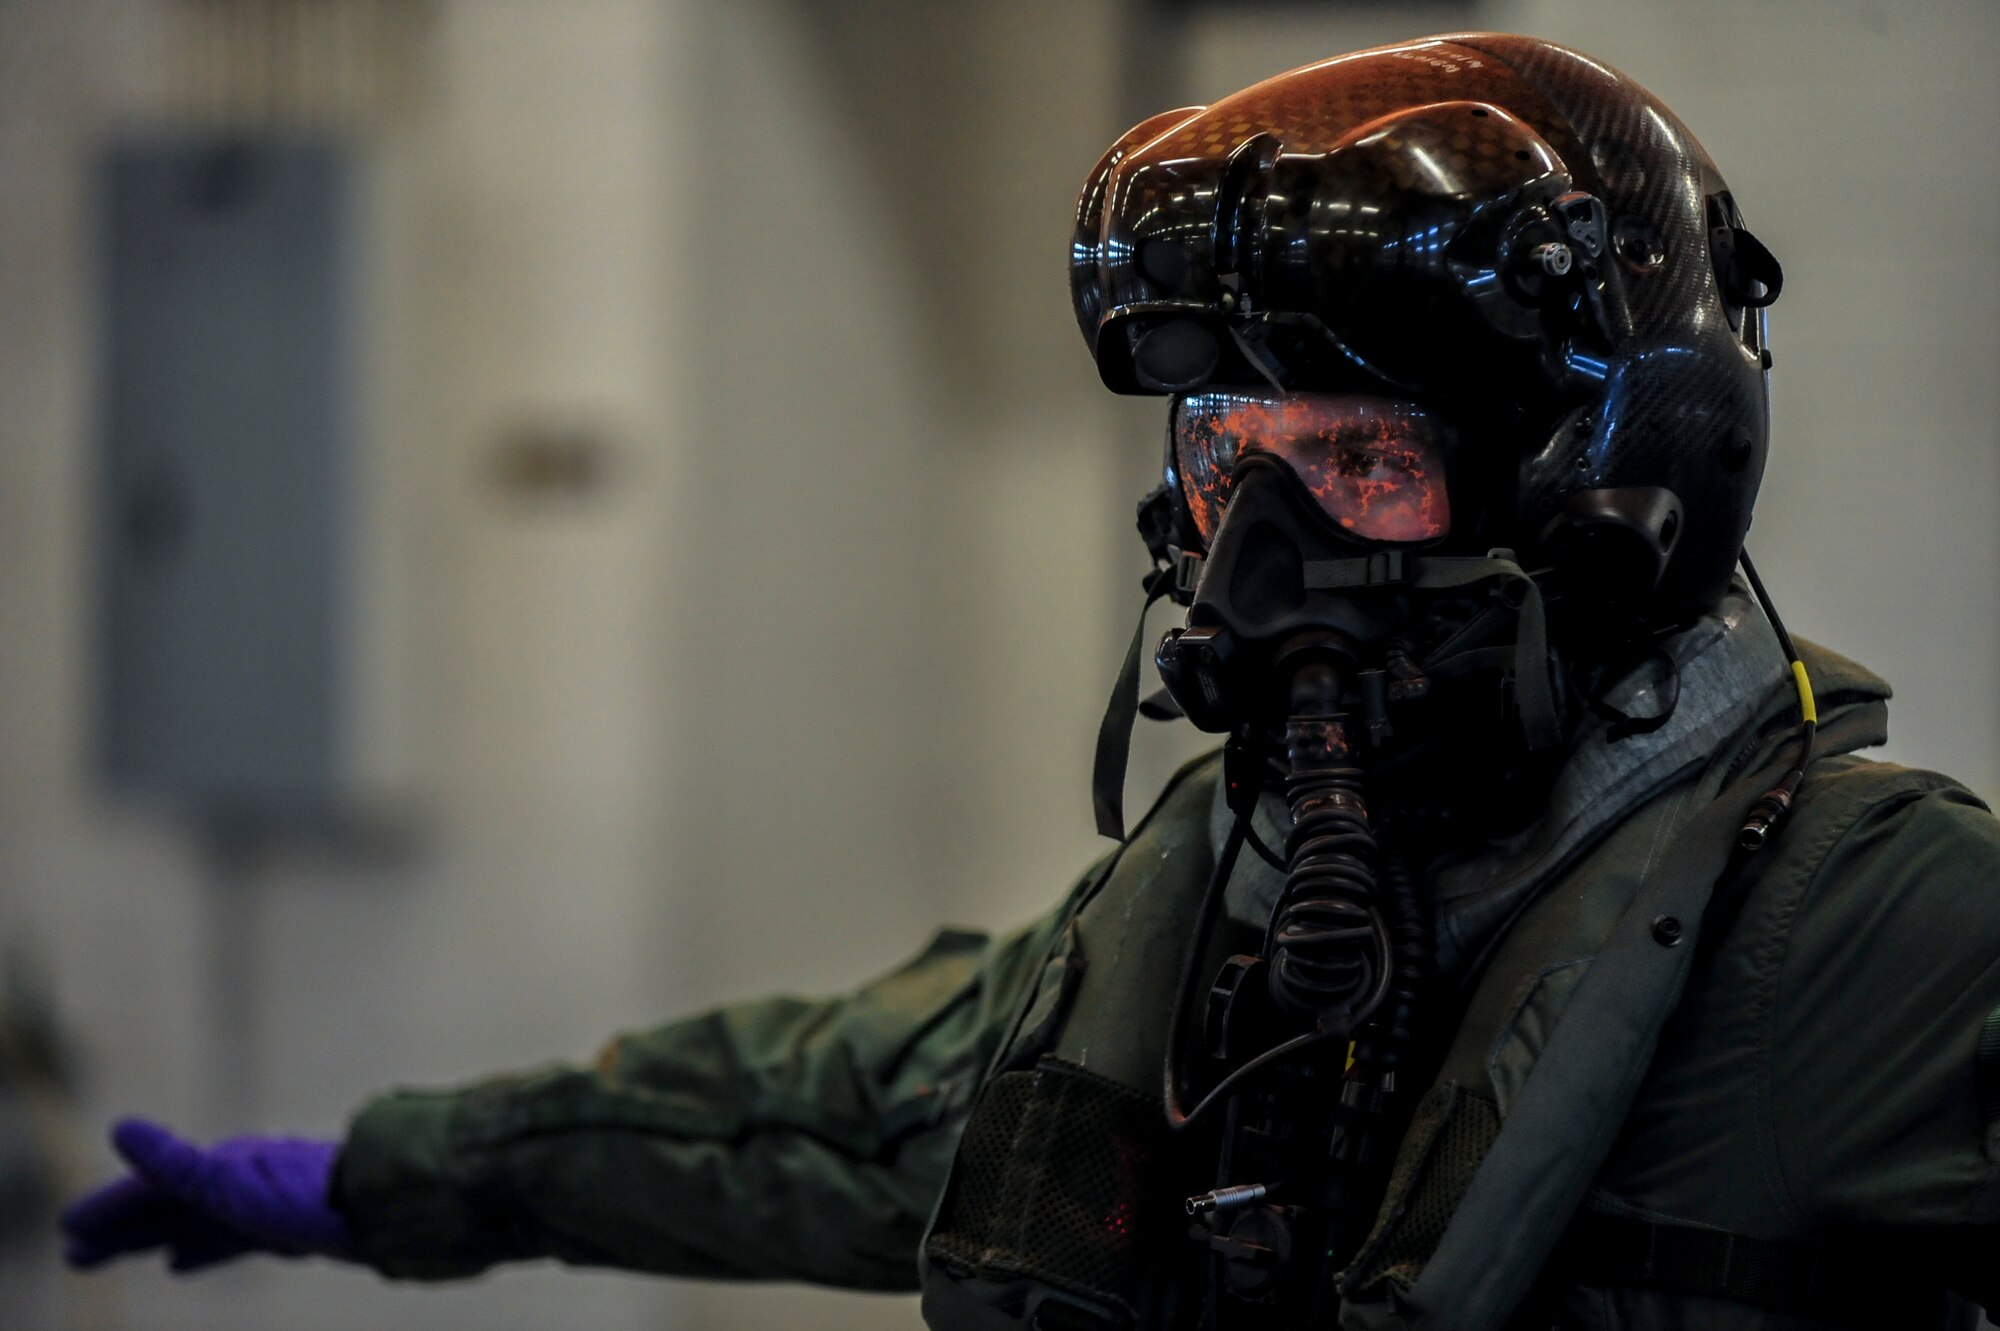 Airman 1st Class Kyle Rogers goes through decontamination procedures during an Air Combat Command Joint Aircrew Flight Equipment evaluation testing Oct. 14, 2014, at Seymour Johnson Air Force Base, N.C. Representatives from several bases were on hand to test current and future flight equipment for every aircraft in the Air Force inventory. Rogers is an aircrew flight equipment specialist assigned to the 355th Operations Support Squadron at Davis-Monthan Air Force Base, Ariz. (U.S. Air Force photo/Airman 1st Class Brittain Crolley)